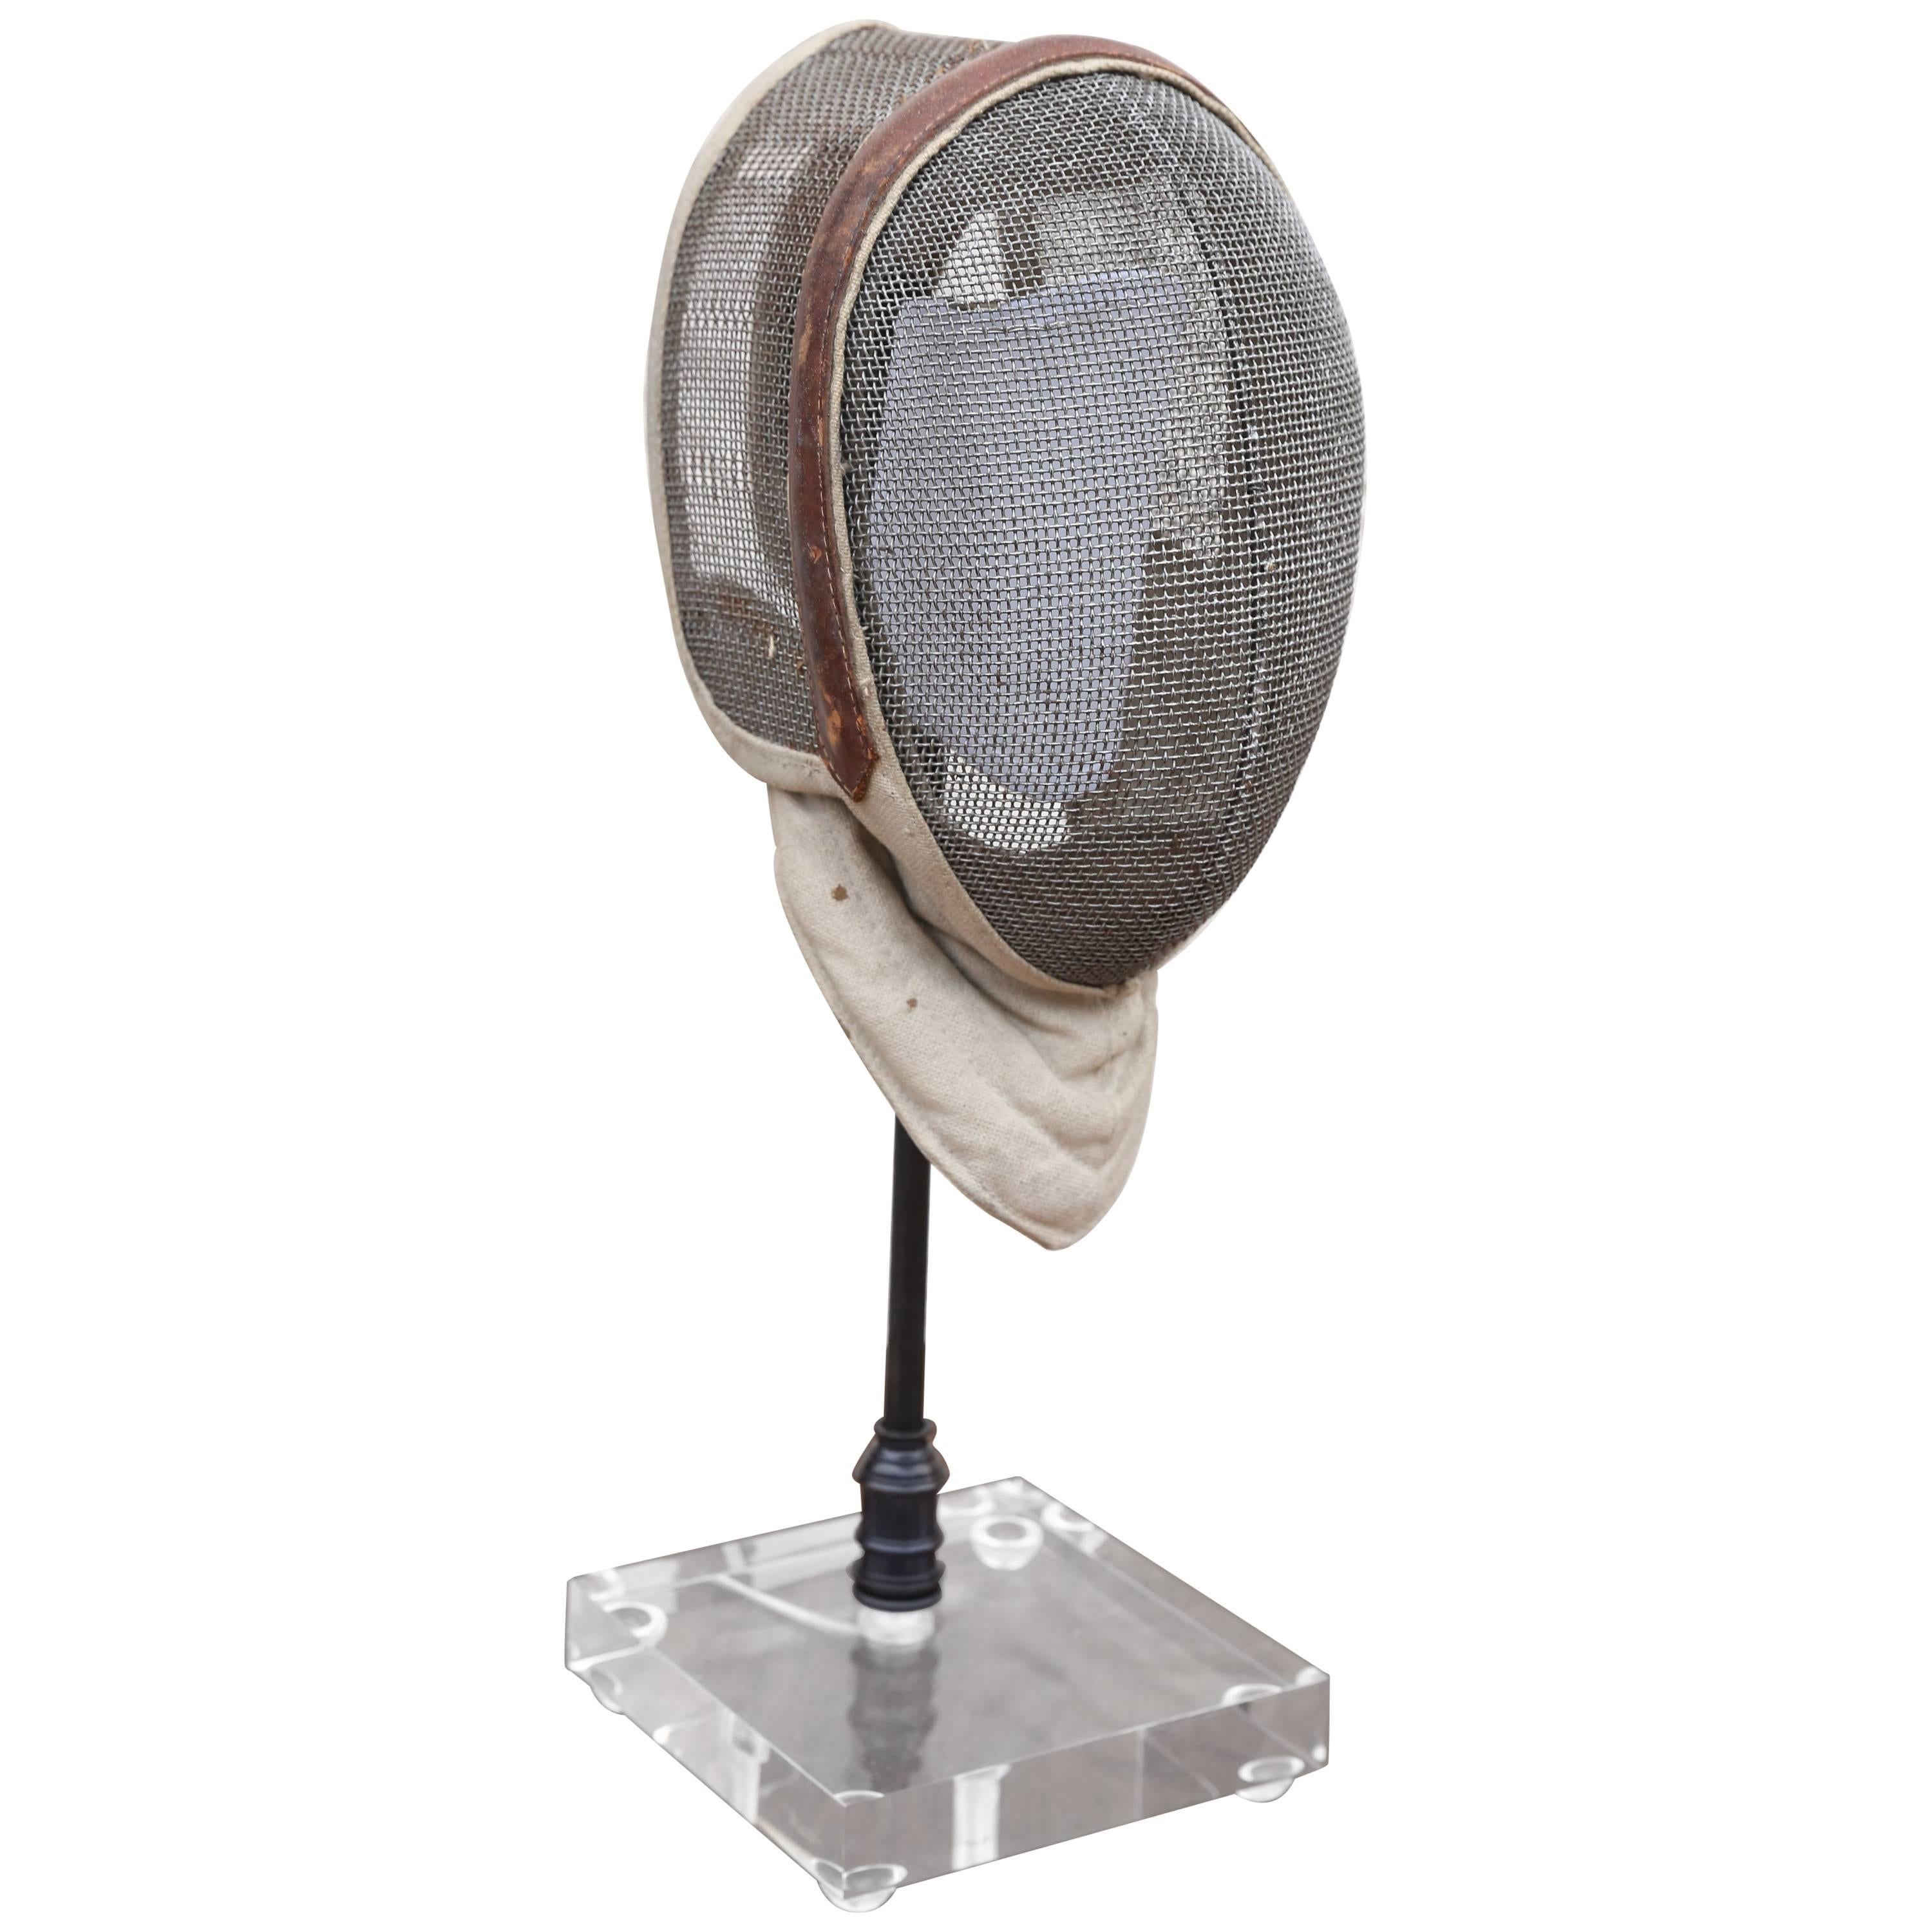 Fencing Mask Lamp